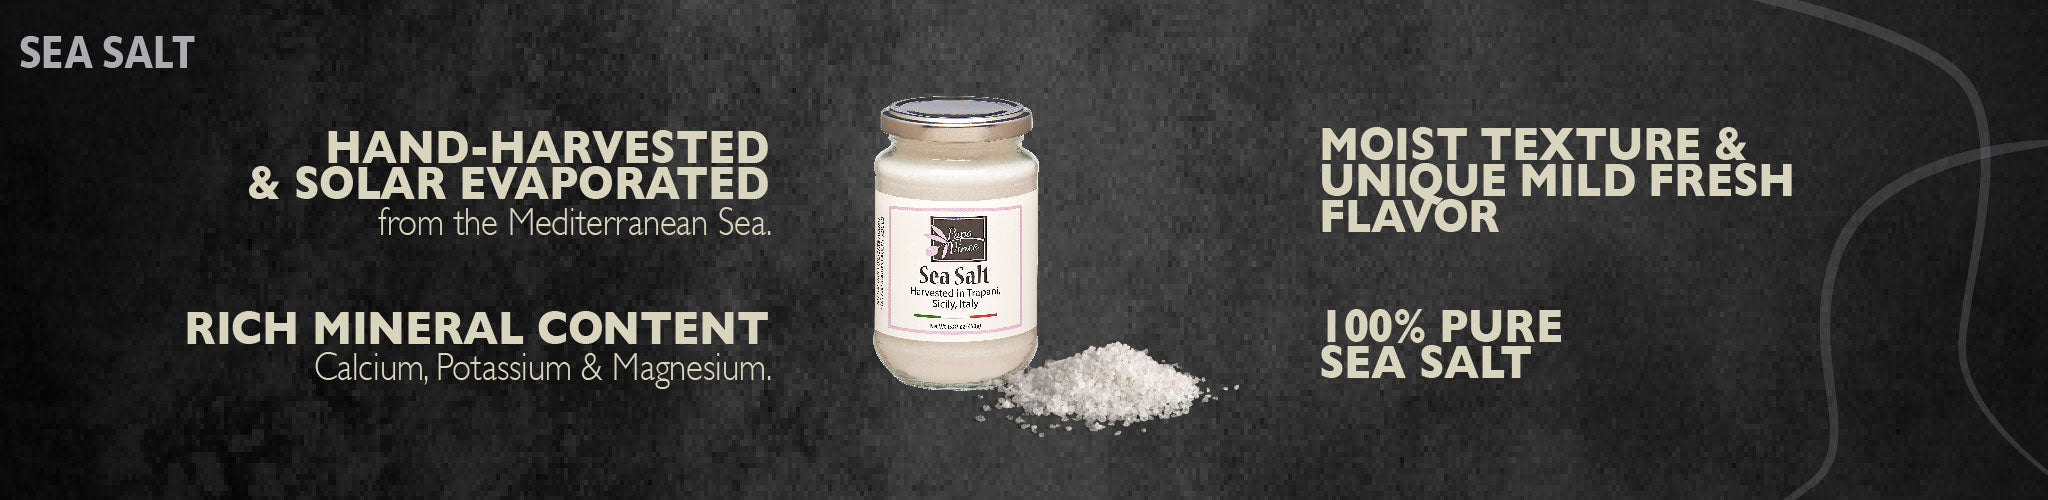 Fine Sea Salt harvested in Trapani, Sicily - Clean Food, NO CHEMICALLY PROCESSED | UNREFINED | GLUTEN FREE | ADDITIVE FREE | NO ANTI-CAKING | Vibrant Clean Flavor | Stored in glass for freshness